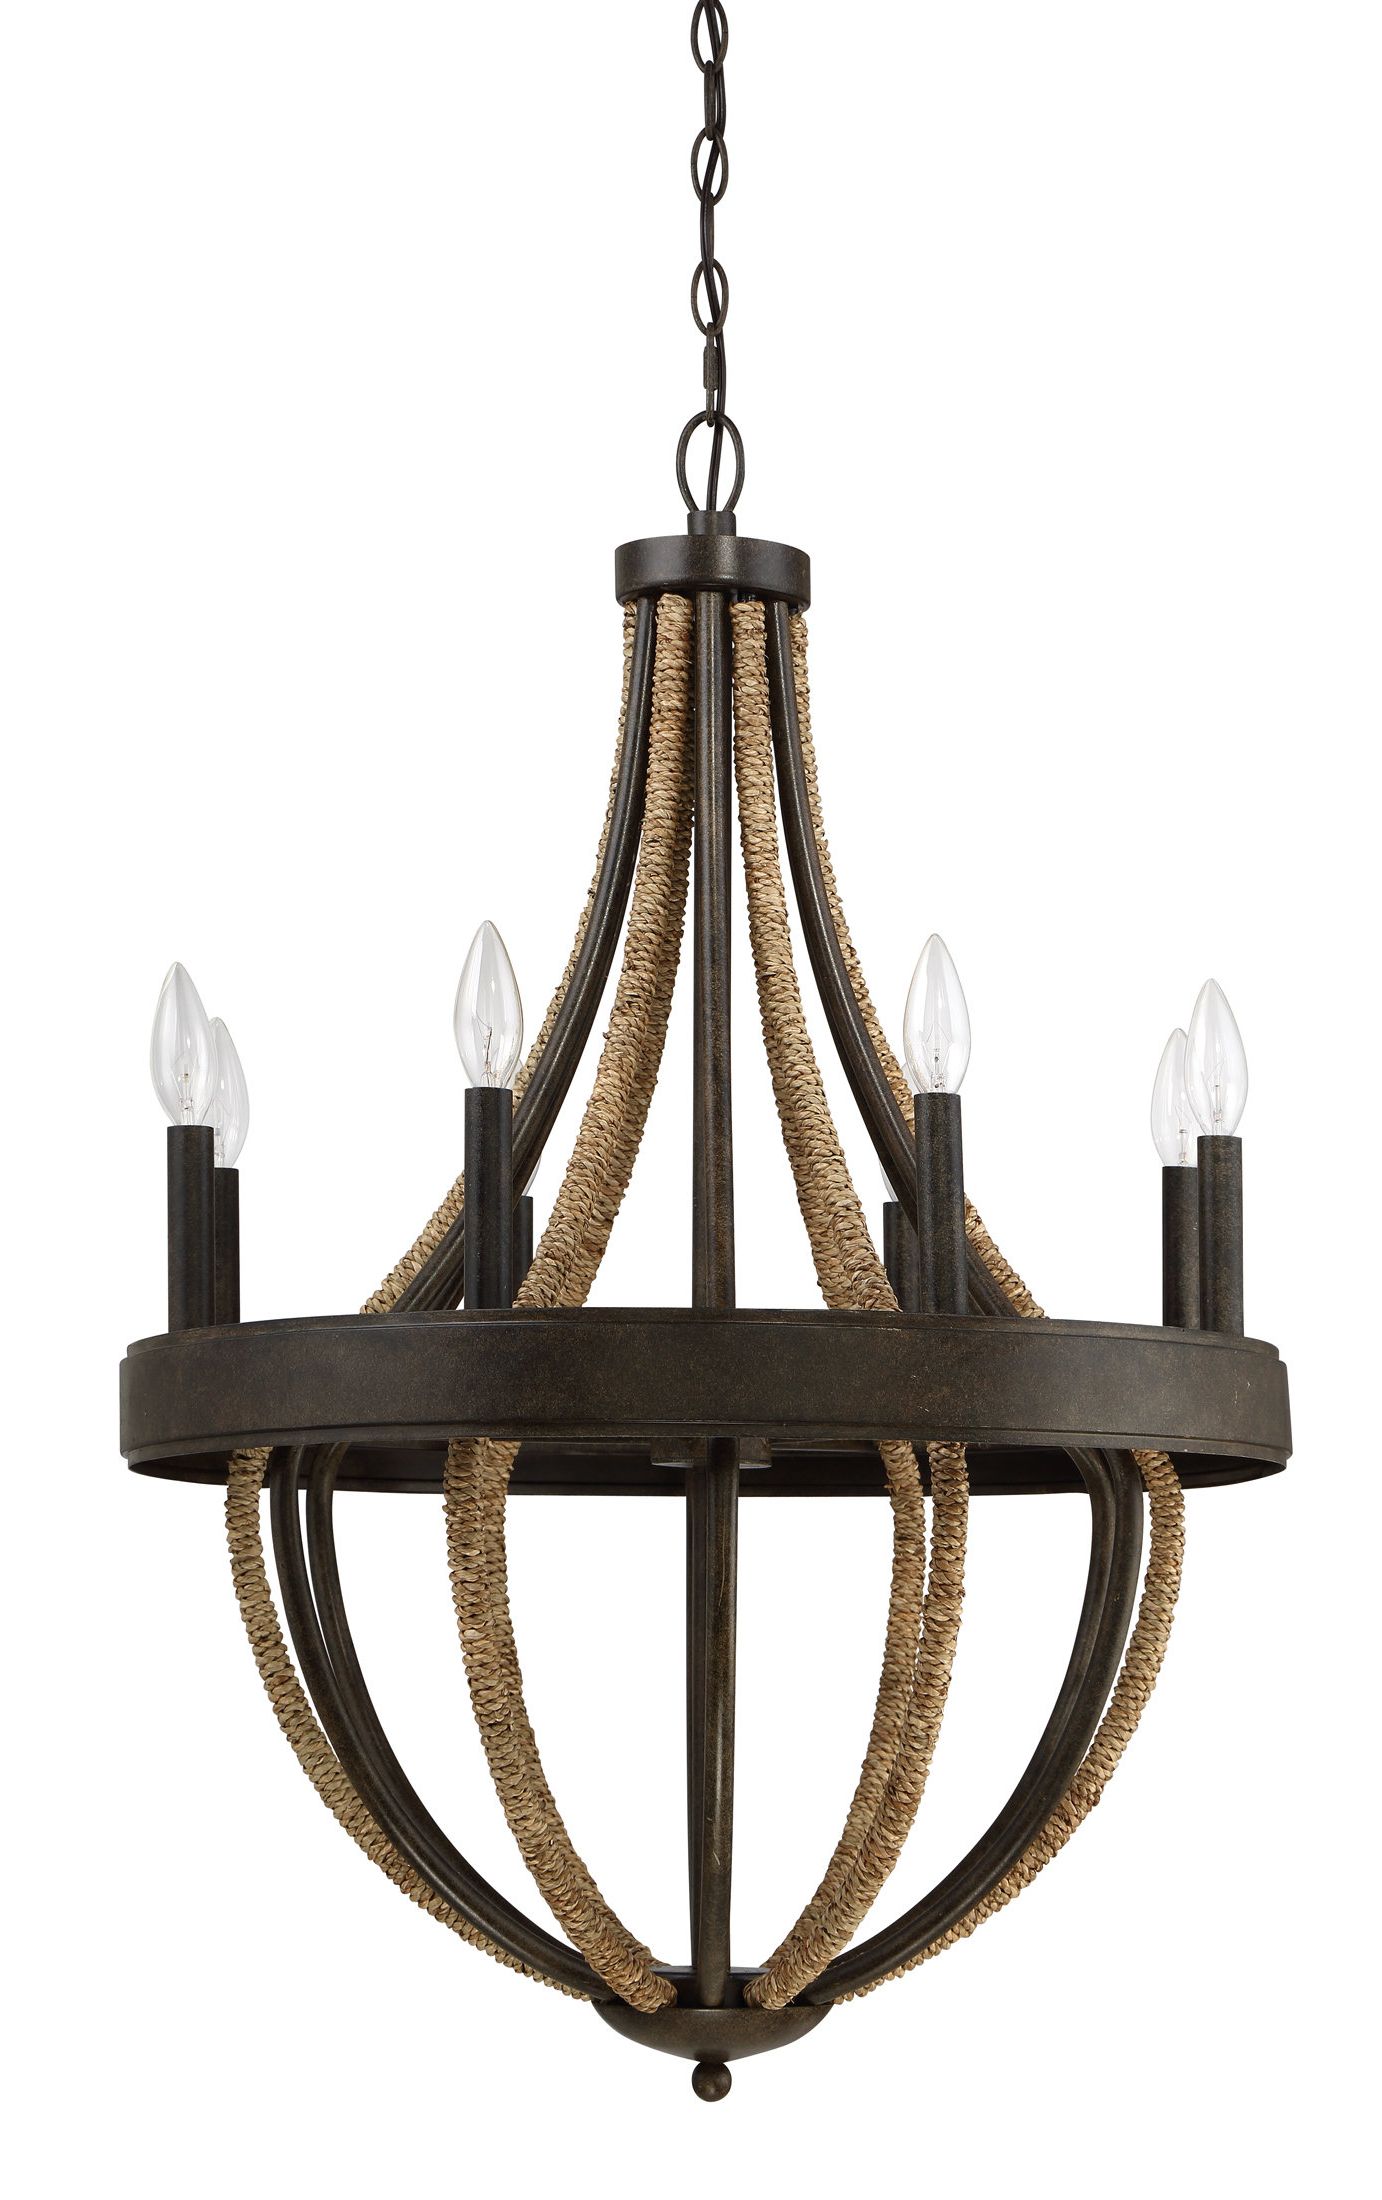 Best And Newest Kenna 5 Light Empire Chandeliers Pertaining To Helga 8 Light Empire Chandelier (View 21 of 25)